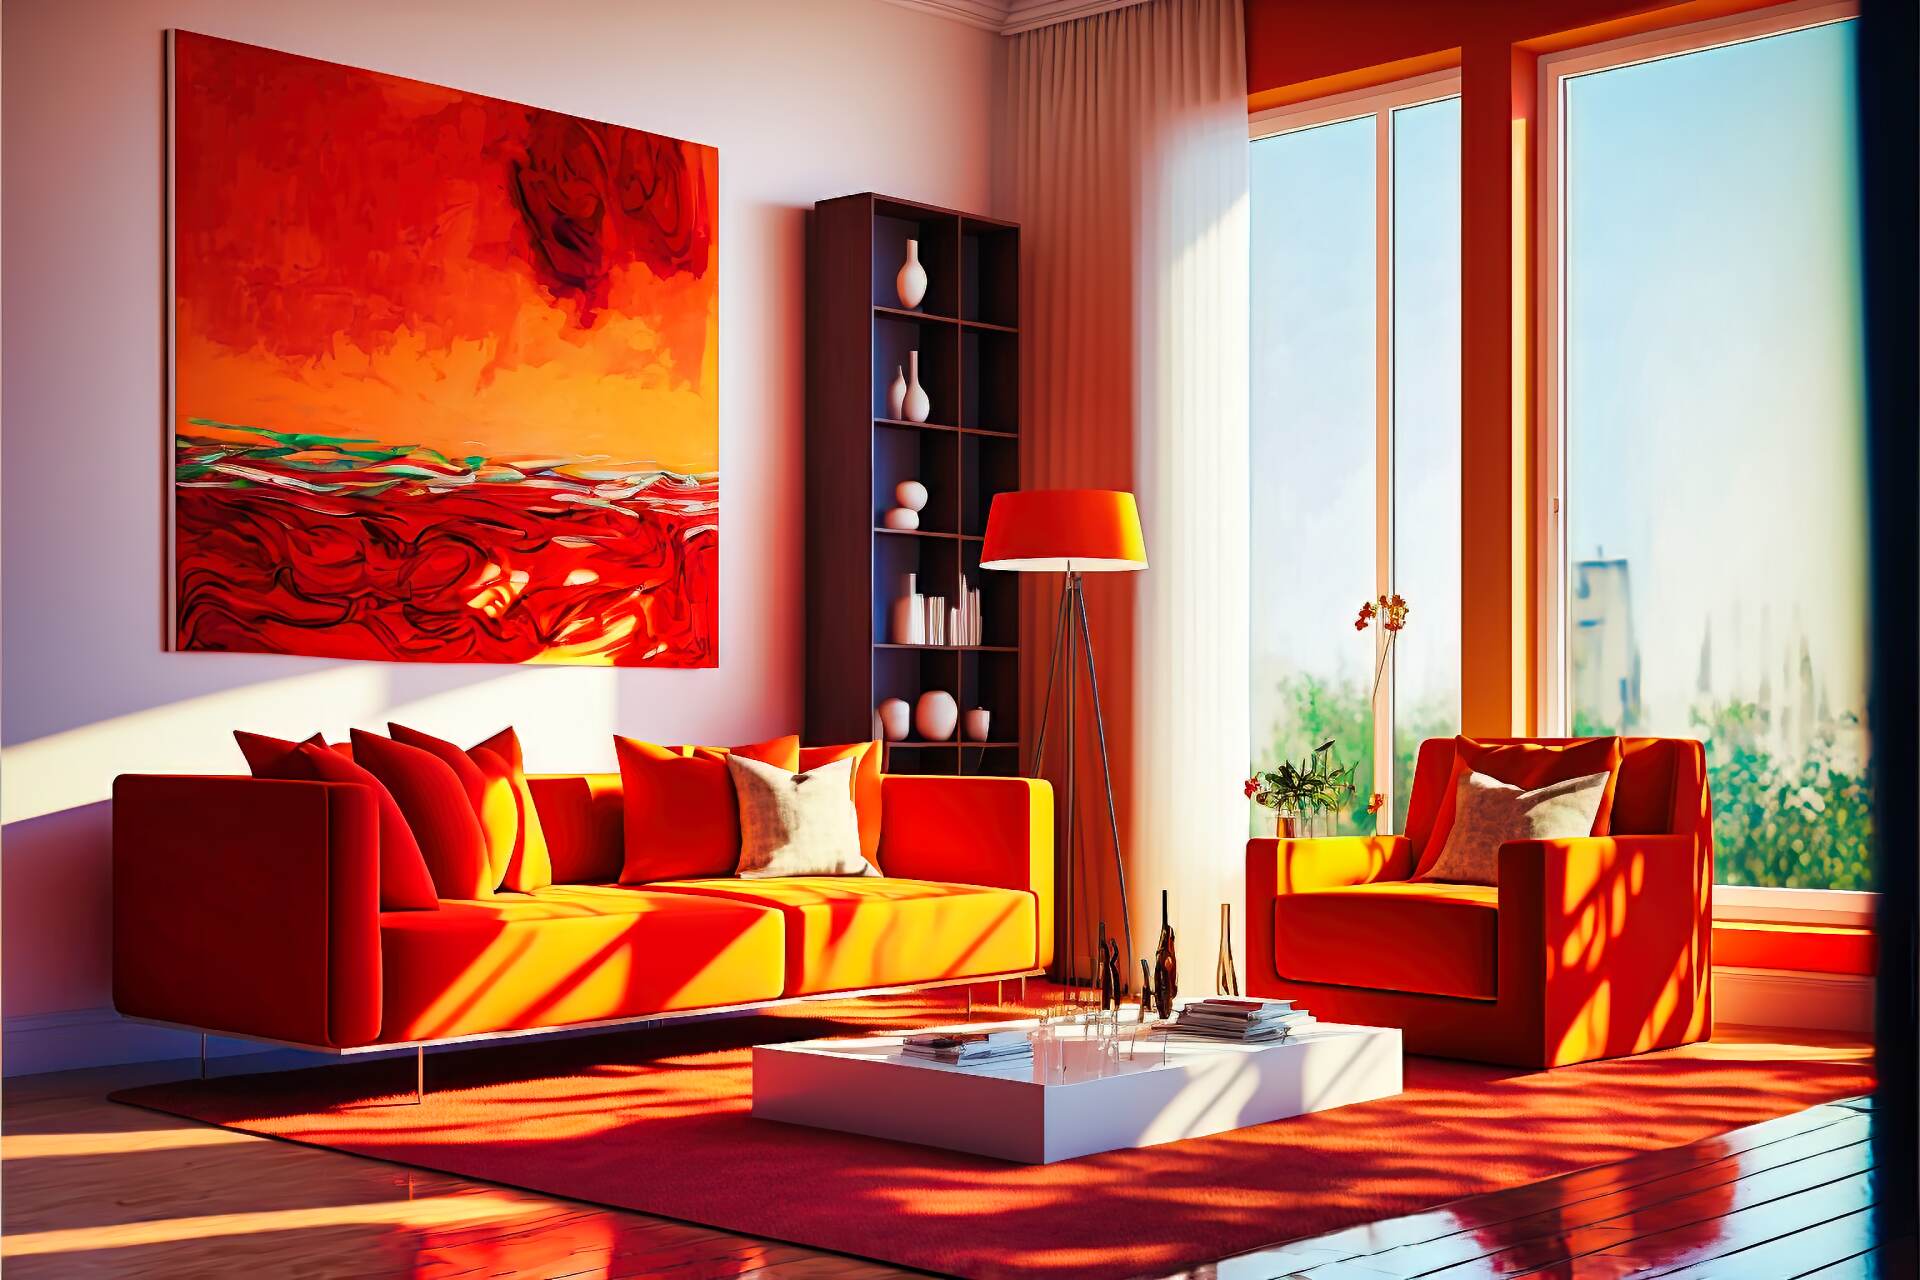 A Modern Living Room In Vibrant Shades Of Red And Orange, With A Large Window Allowing Light To Flood In. A Bright Red Velvet Sofa, A Patterned Armchair And A Glass Coffee Table. Colorful Artwork Adorning The Walls, With A Bright Red Rug And A Tall Lamp In The Corner.